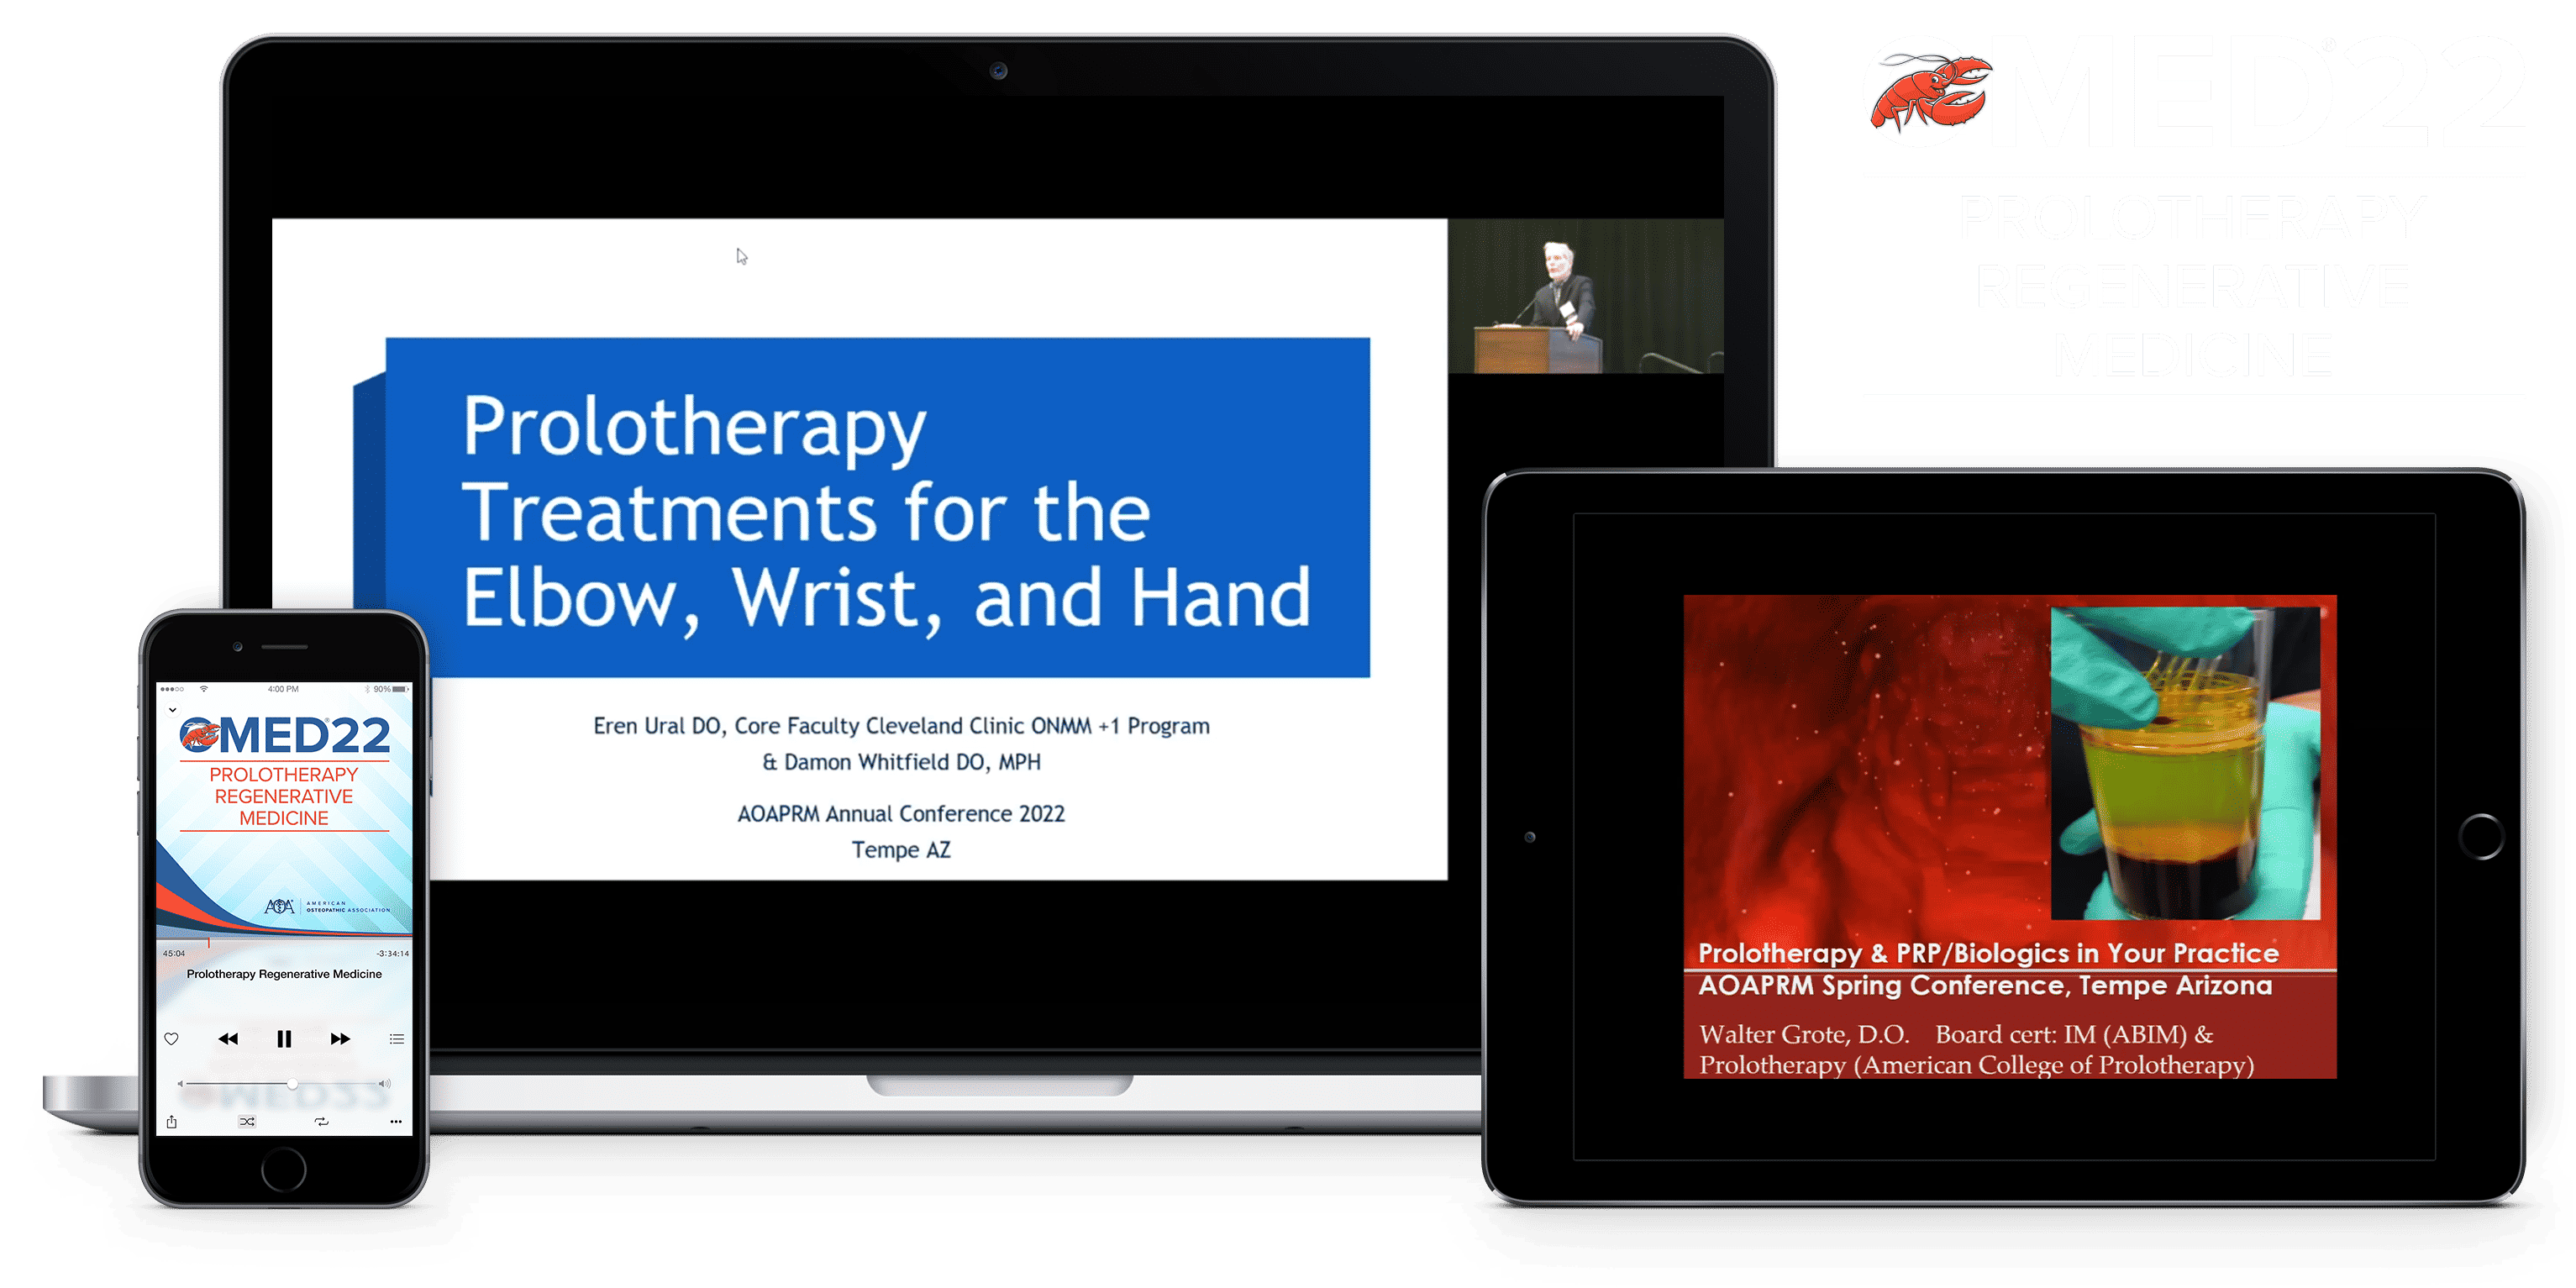 Laptop, tablet, and phone with OMED 2022 - Prolotherapy Regenerative Medicine course on screen